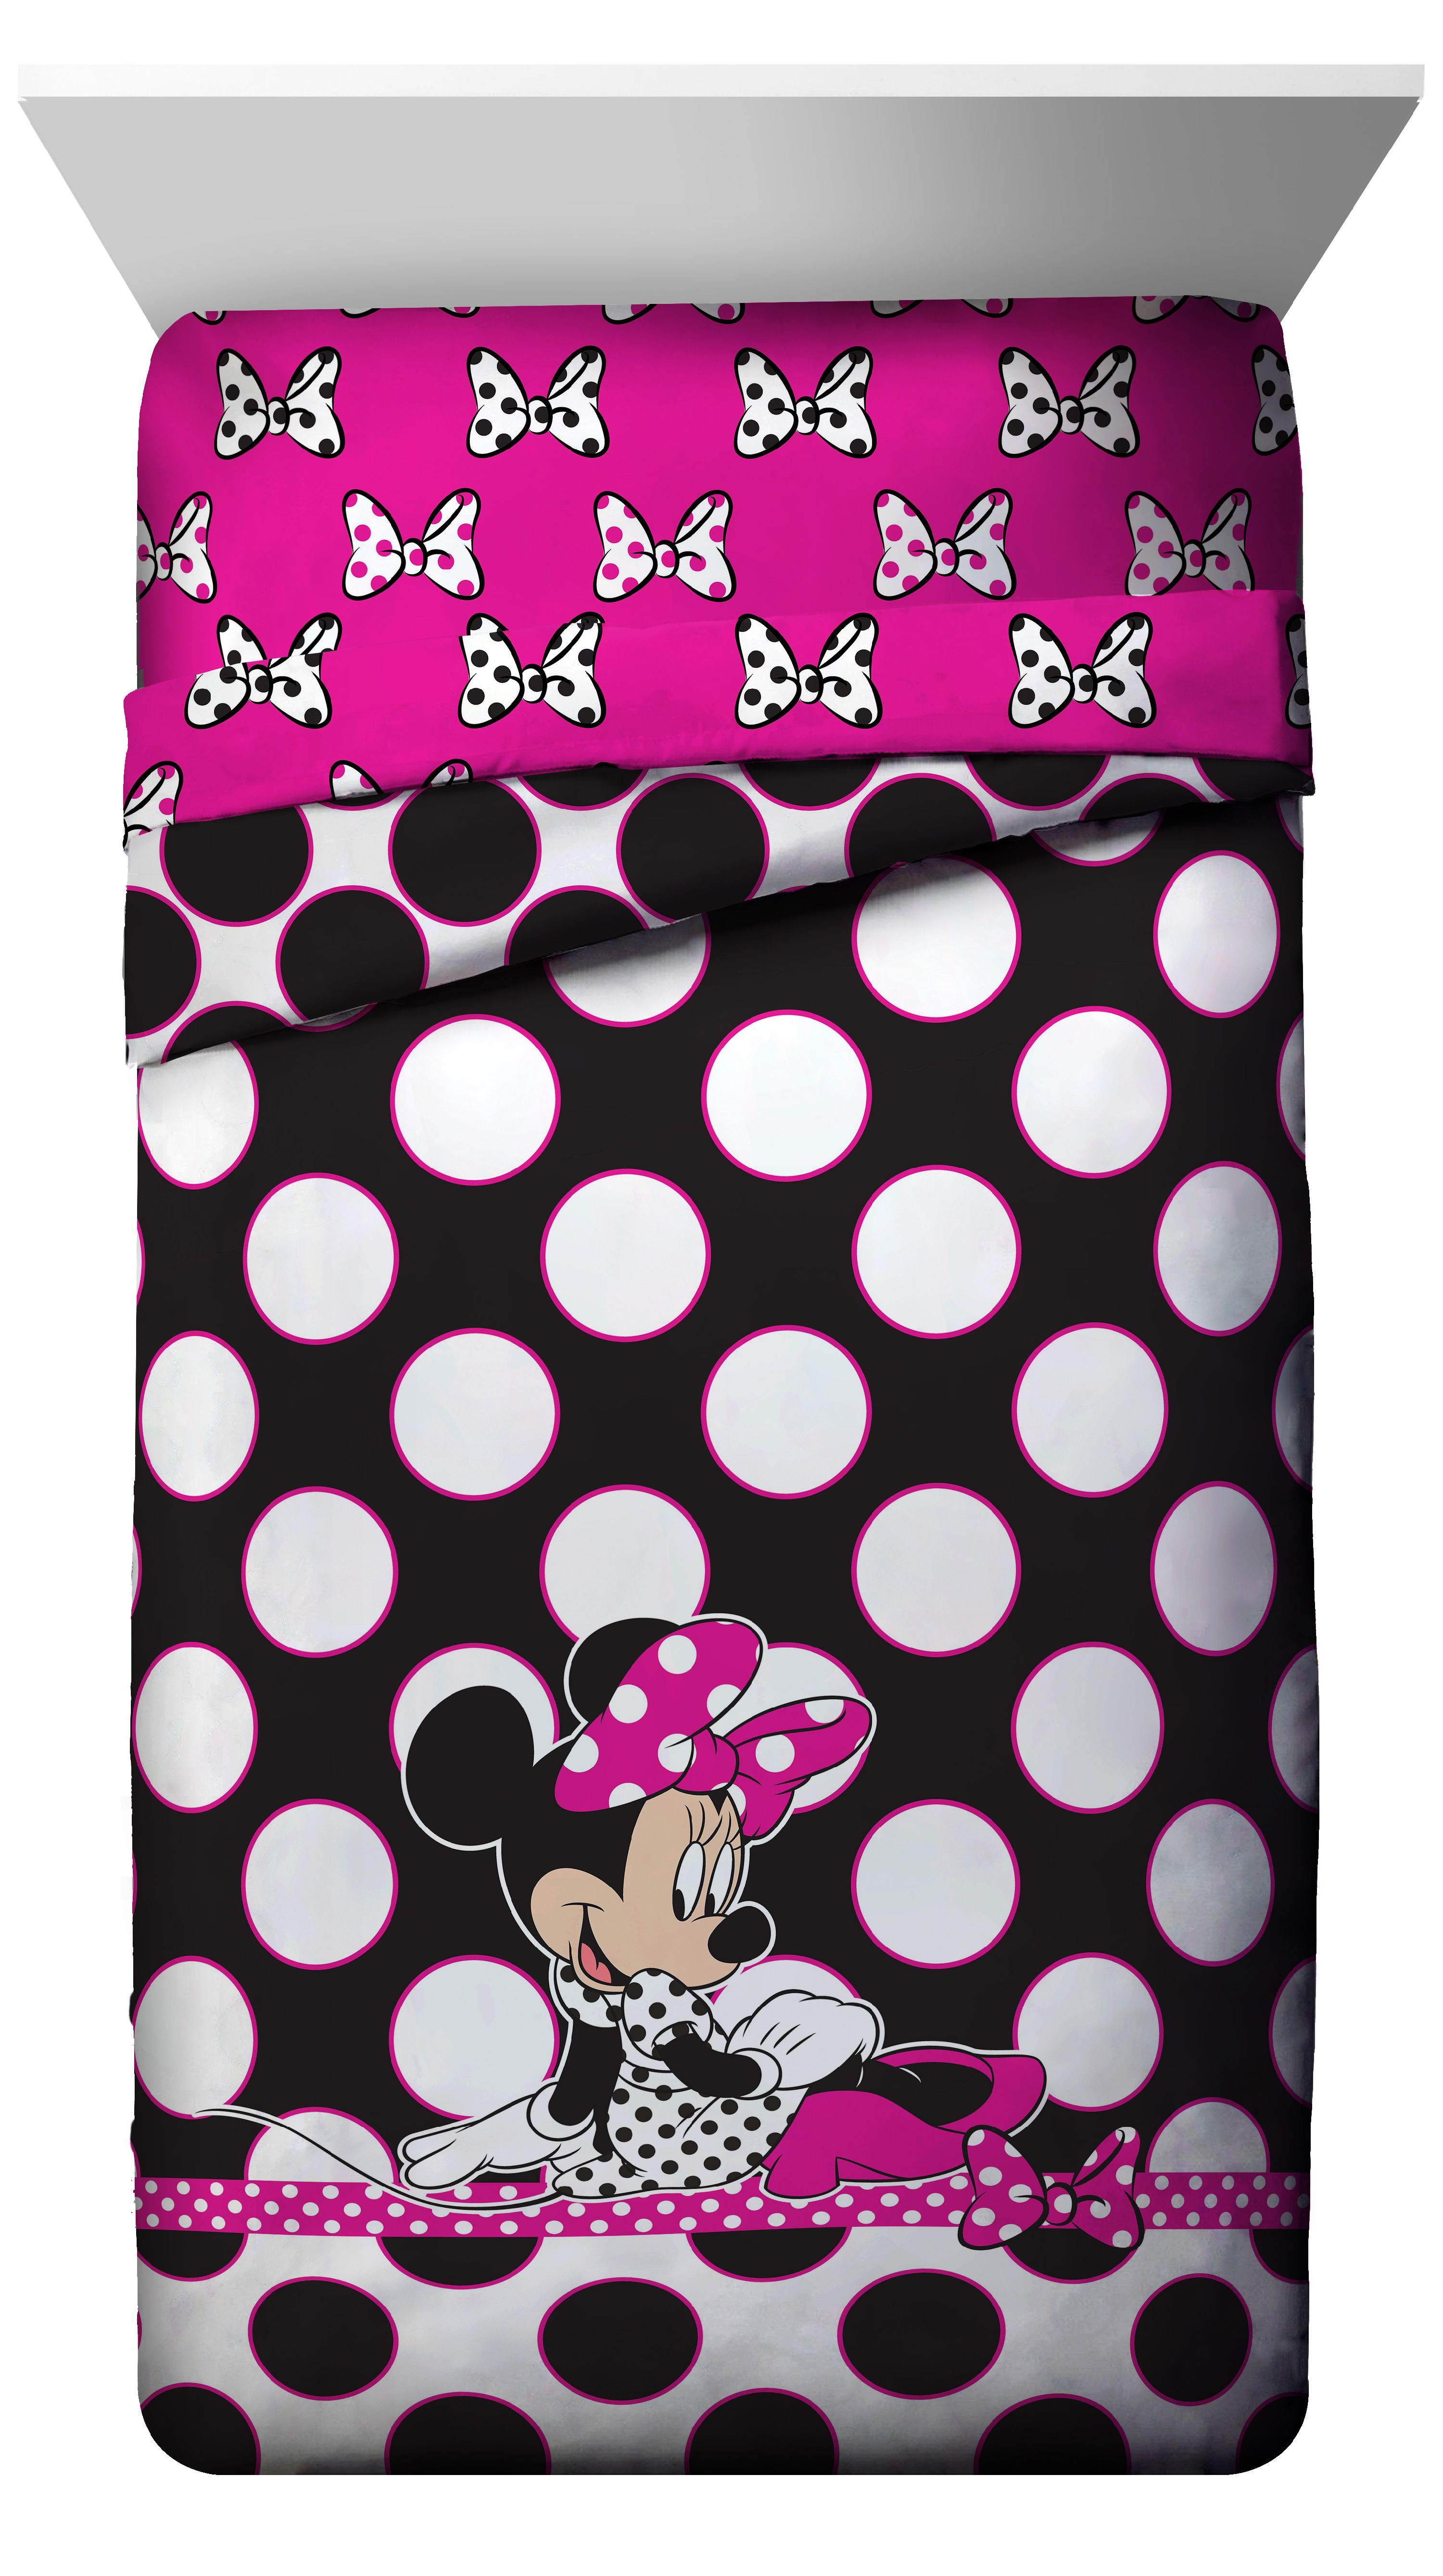 Minnie Mouse Reversible Twin/Full Comforter - image 2 of 3